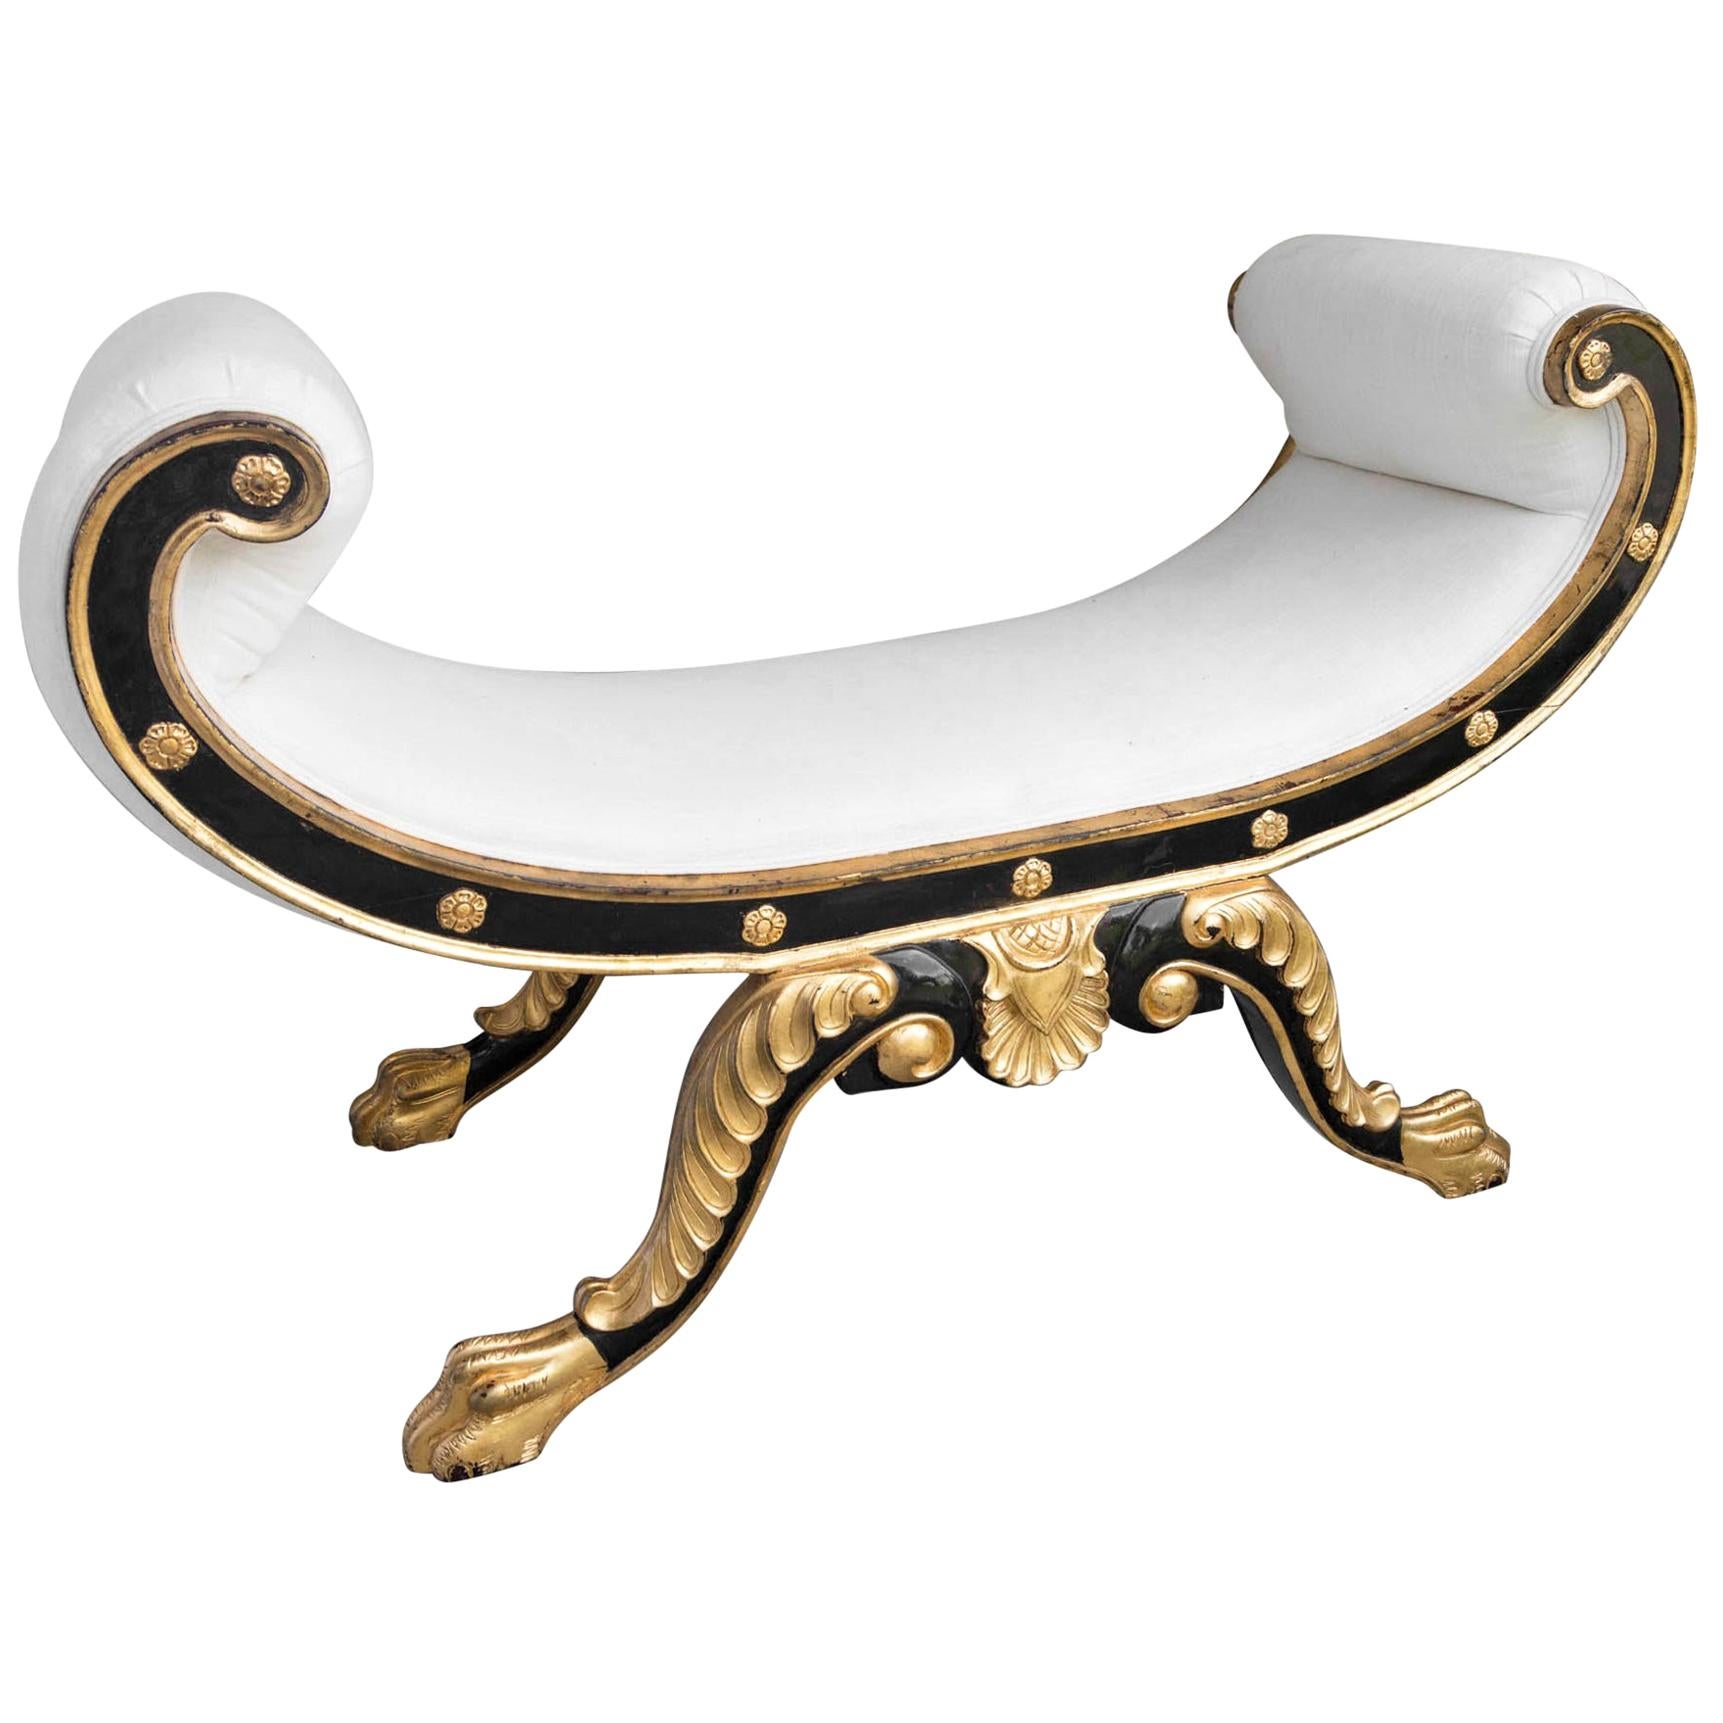 Regency Style Painted and Gilt Benches